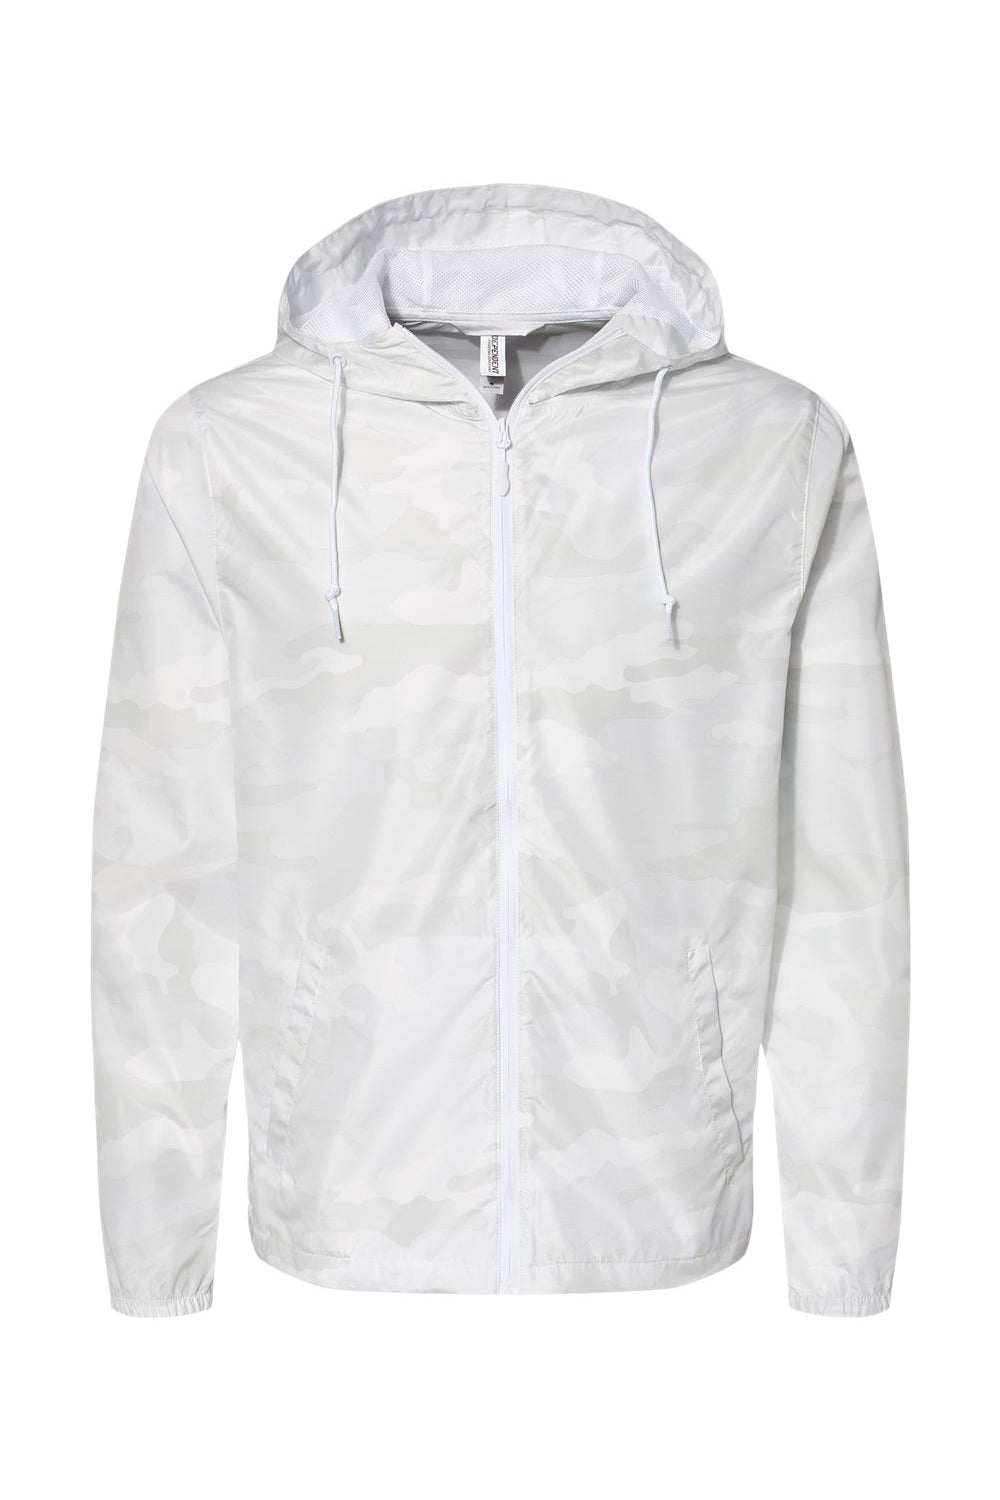 Independent Trading Co. EXP54LWZ Mens Full Zip Windbreaker Hooded Jacket White Camo Flat Front